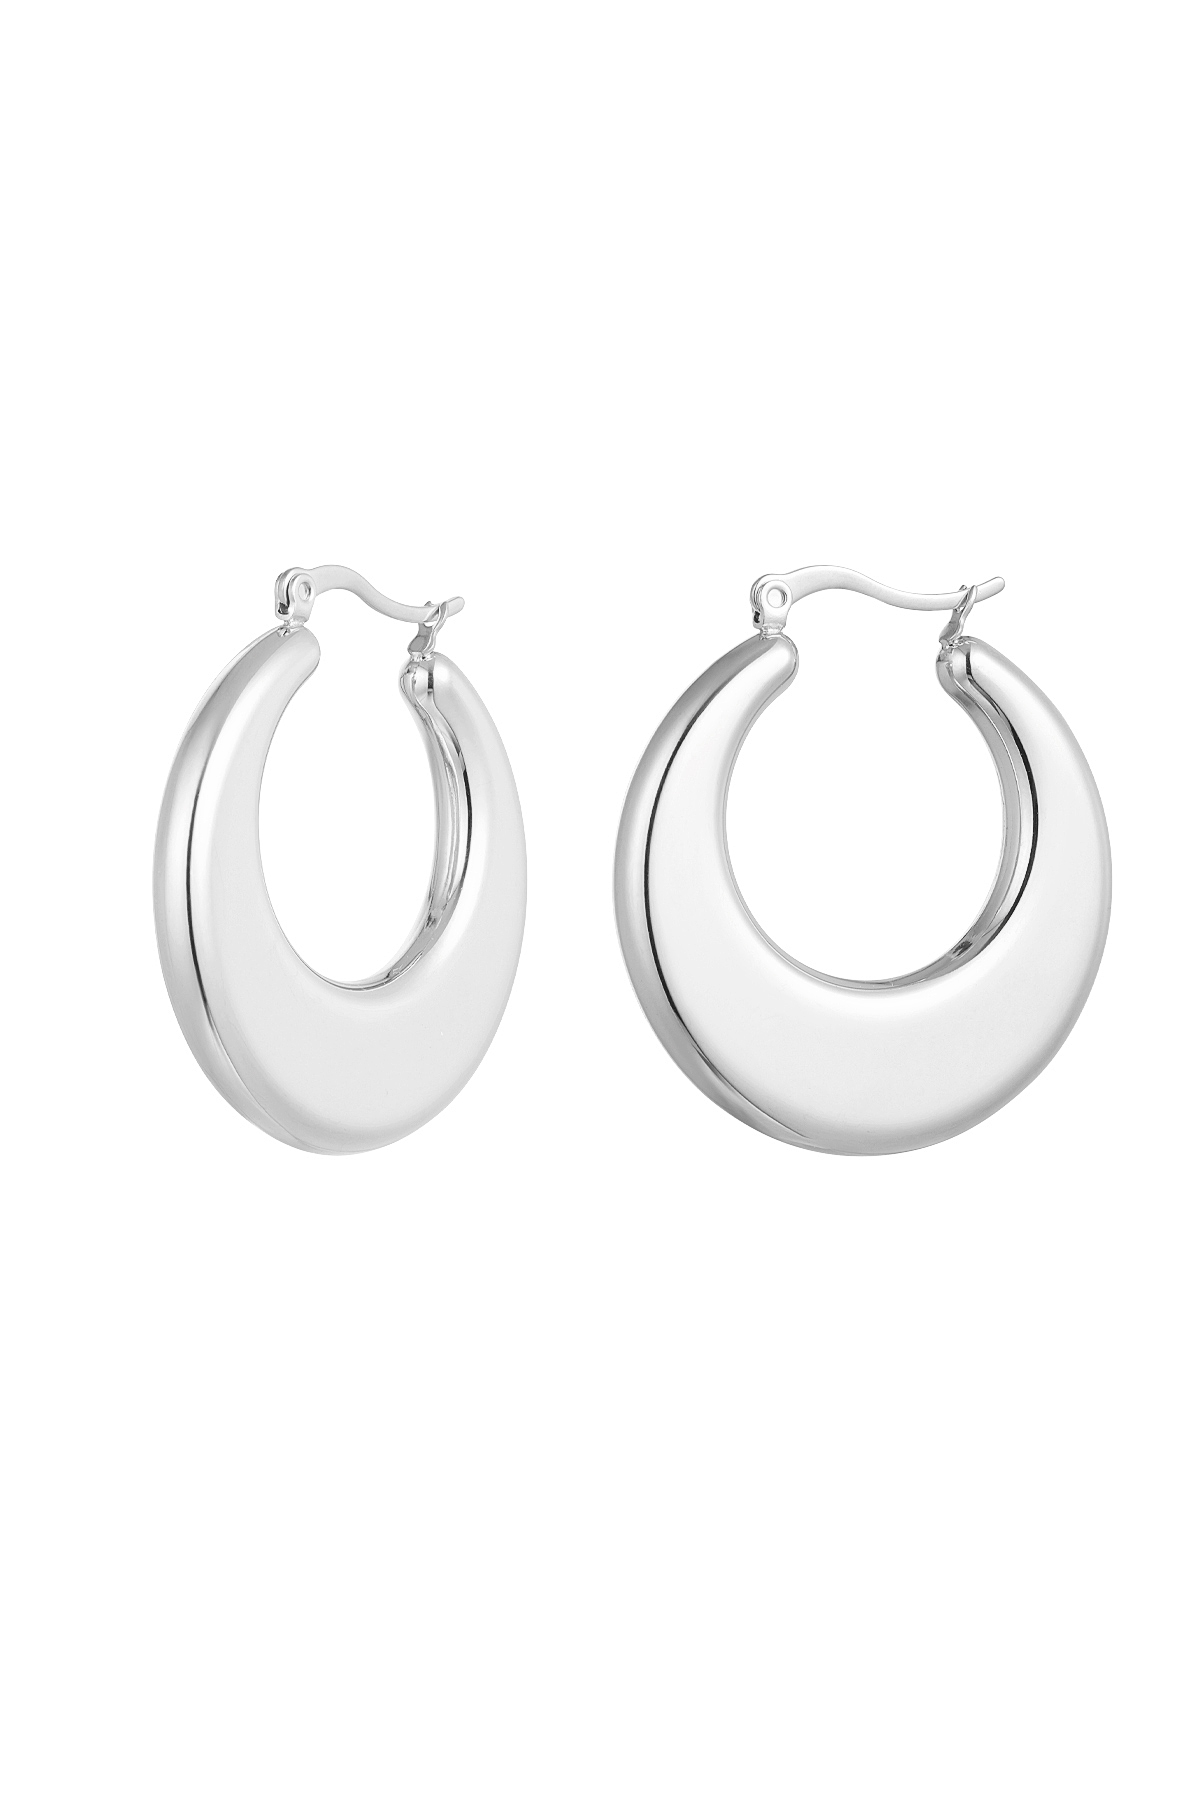 Earrings round classy must-have - silver 